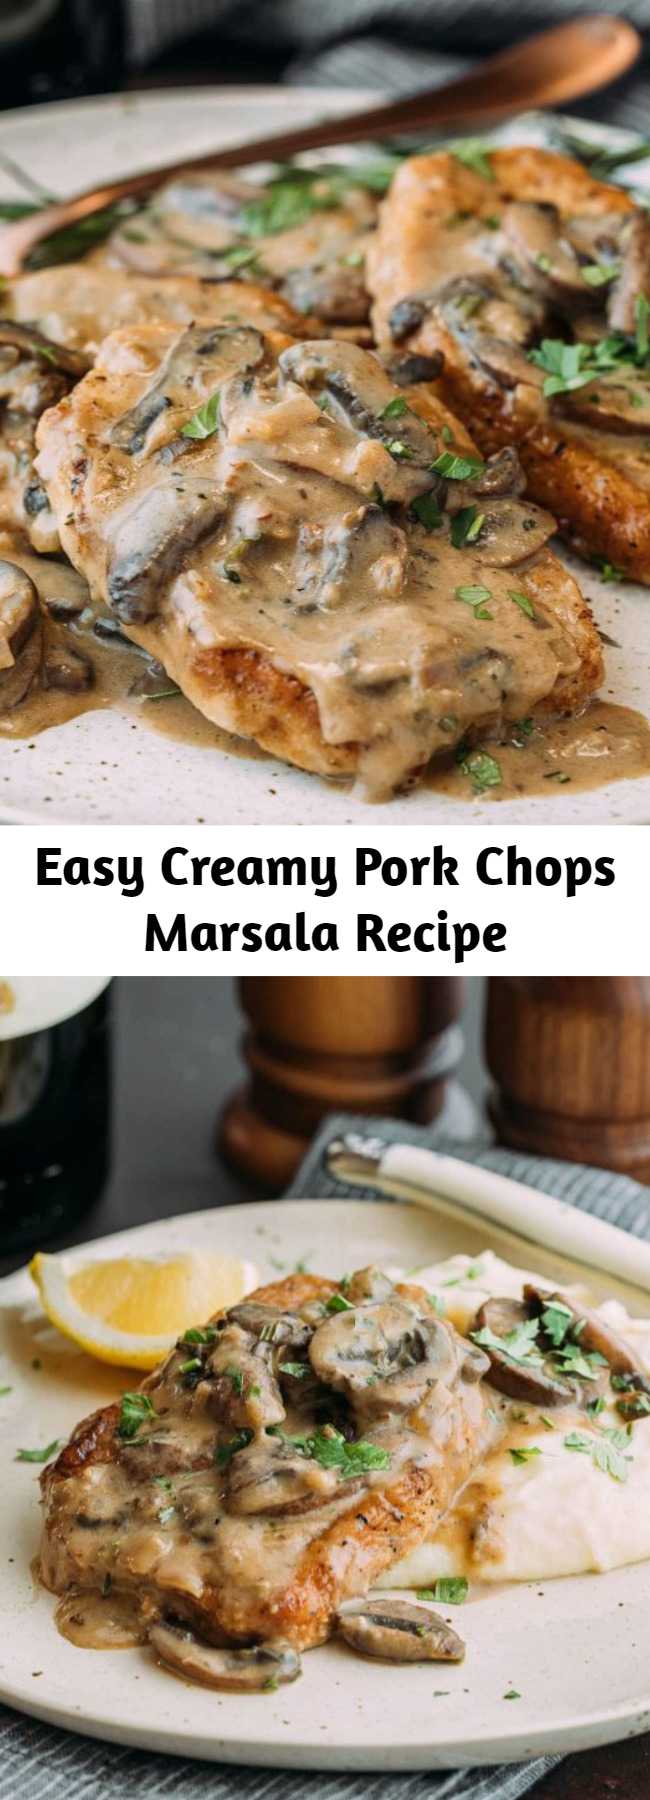 Easy Creamy Pork Chops Marsala Recipe - This easy pork marsala recipe is a great option for treating yourself on a busy night, or for serving to guests. With the rich and flavorful sauce, no one will believe it only took 30 minutes of cooking time! Perfect for entertaining! #porkchops #easydinner